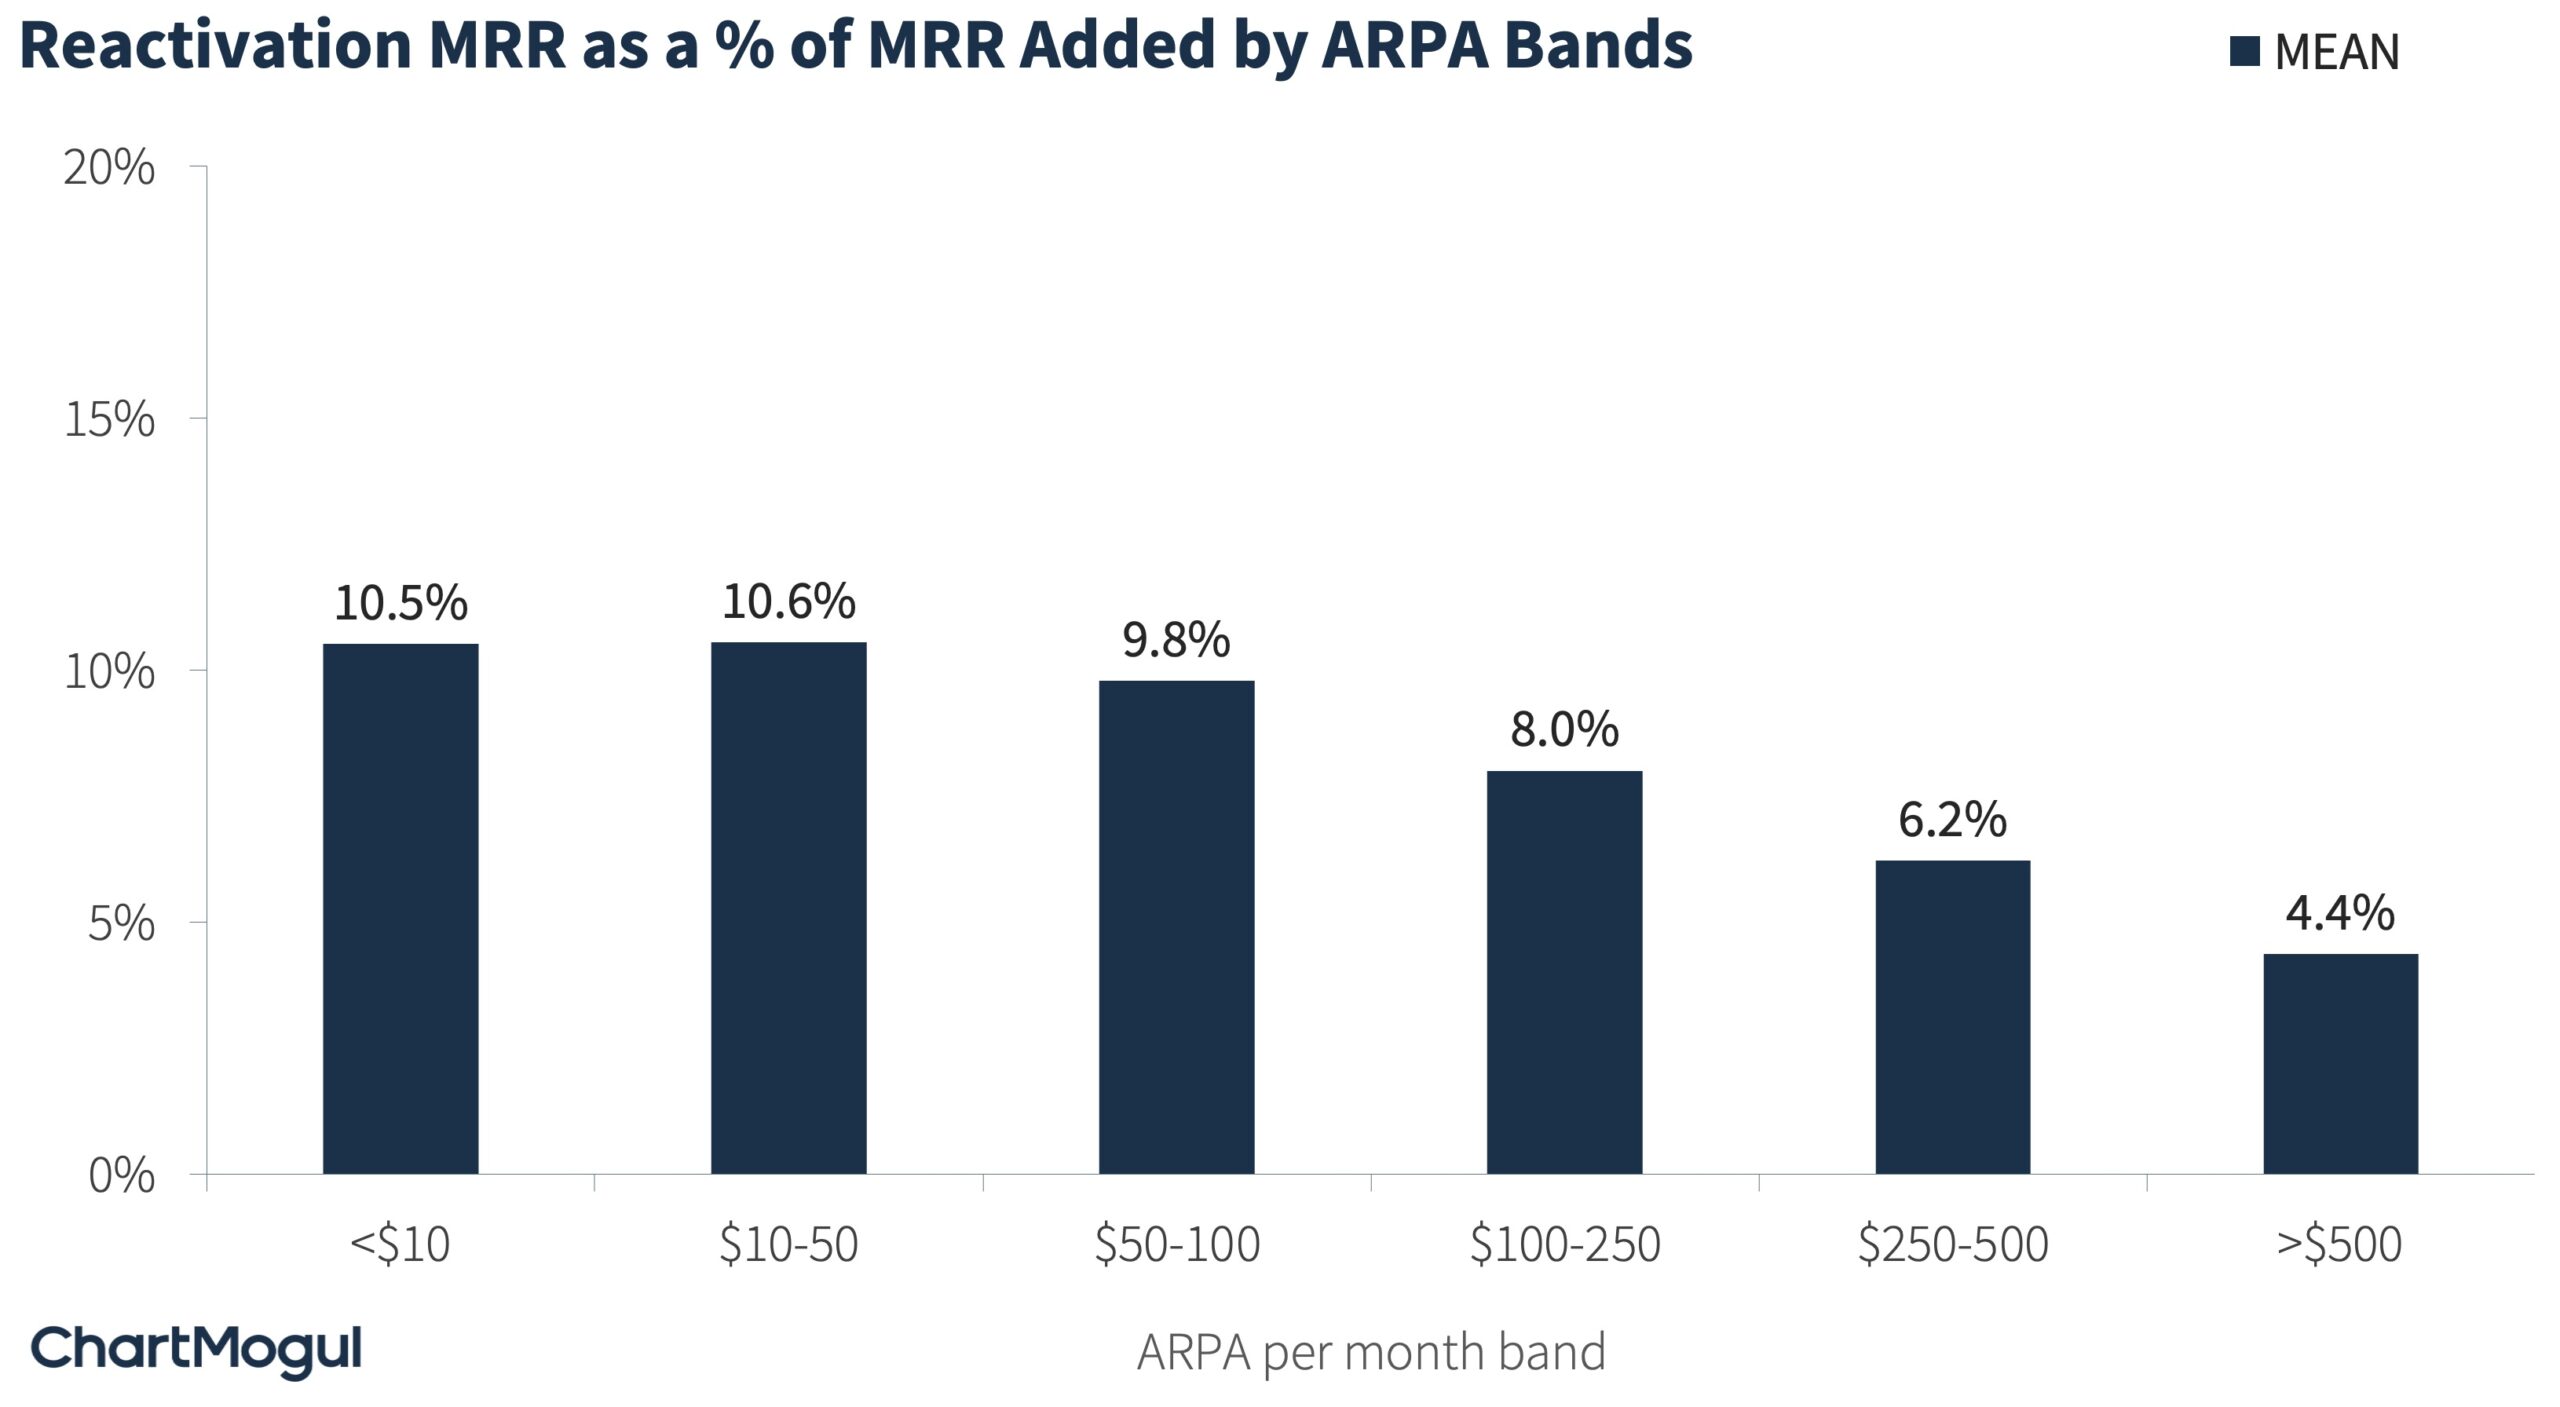 Reactivation MRR as a % of MRR Added by ARPA Bands